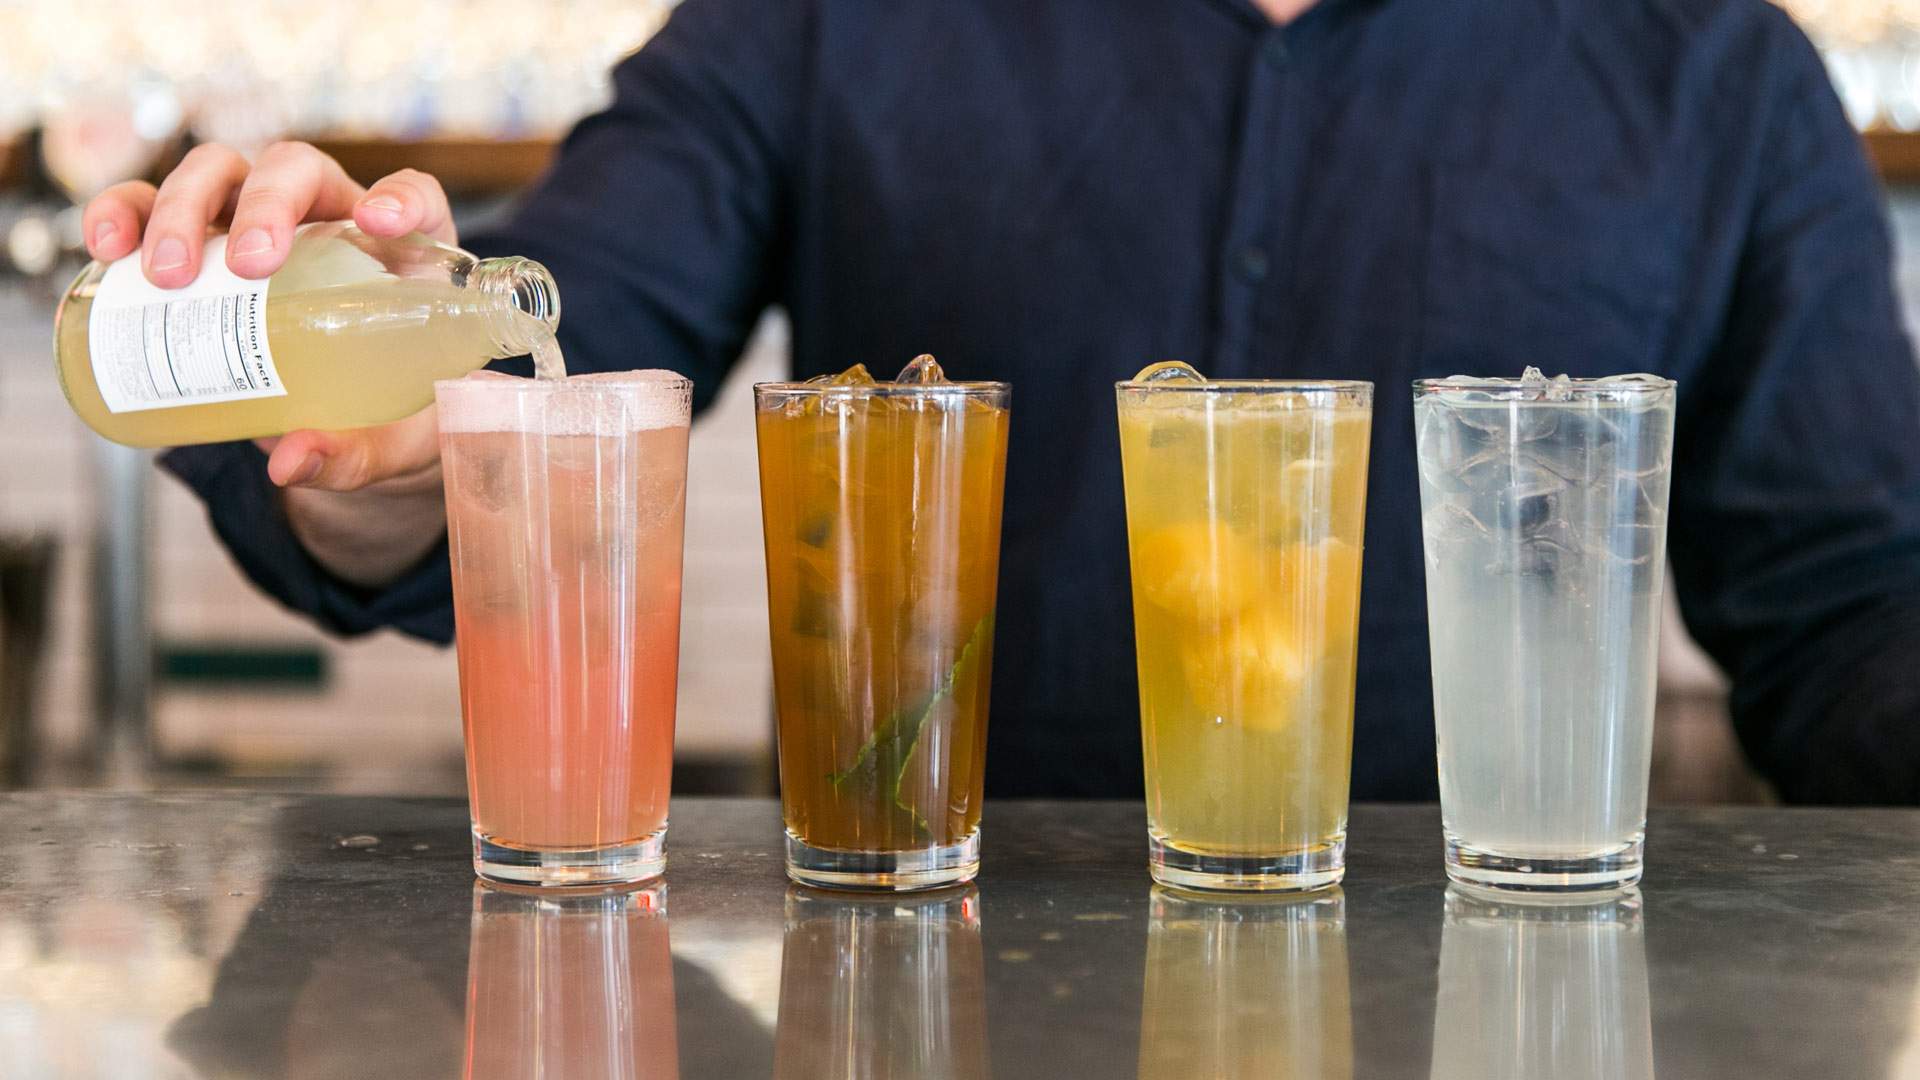 Kyoto Protocol Is the New Low-Waste Cocktail Bar Pop-Up from the Belles Crew